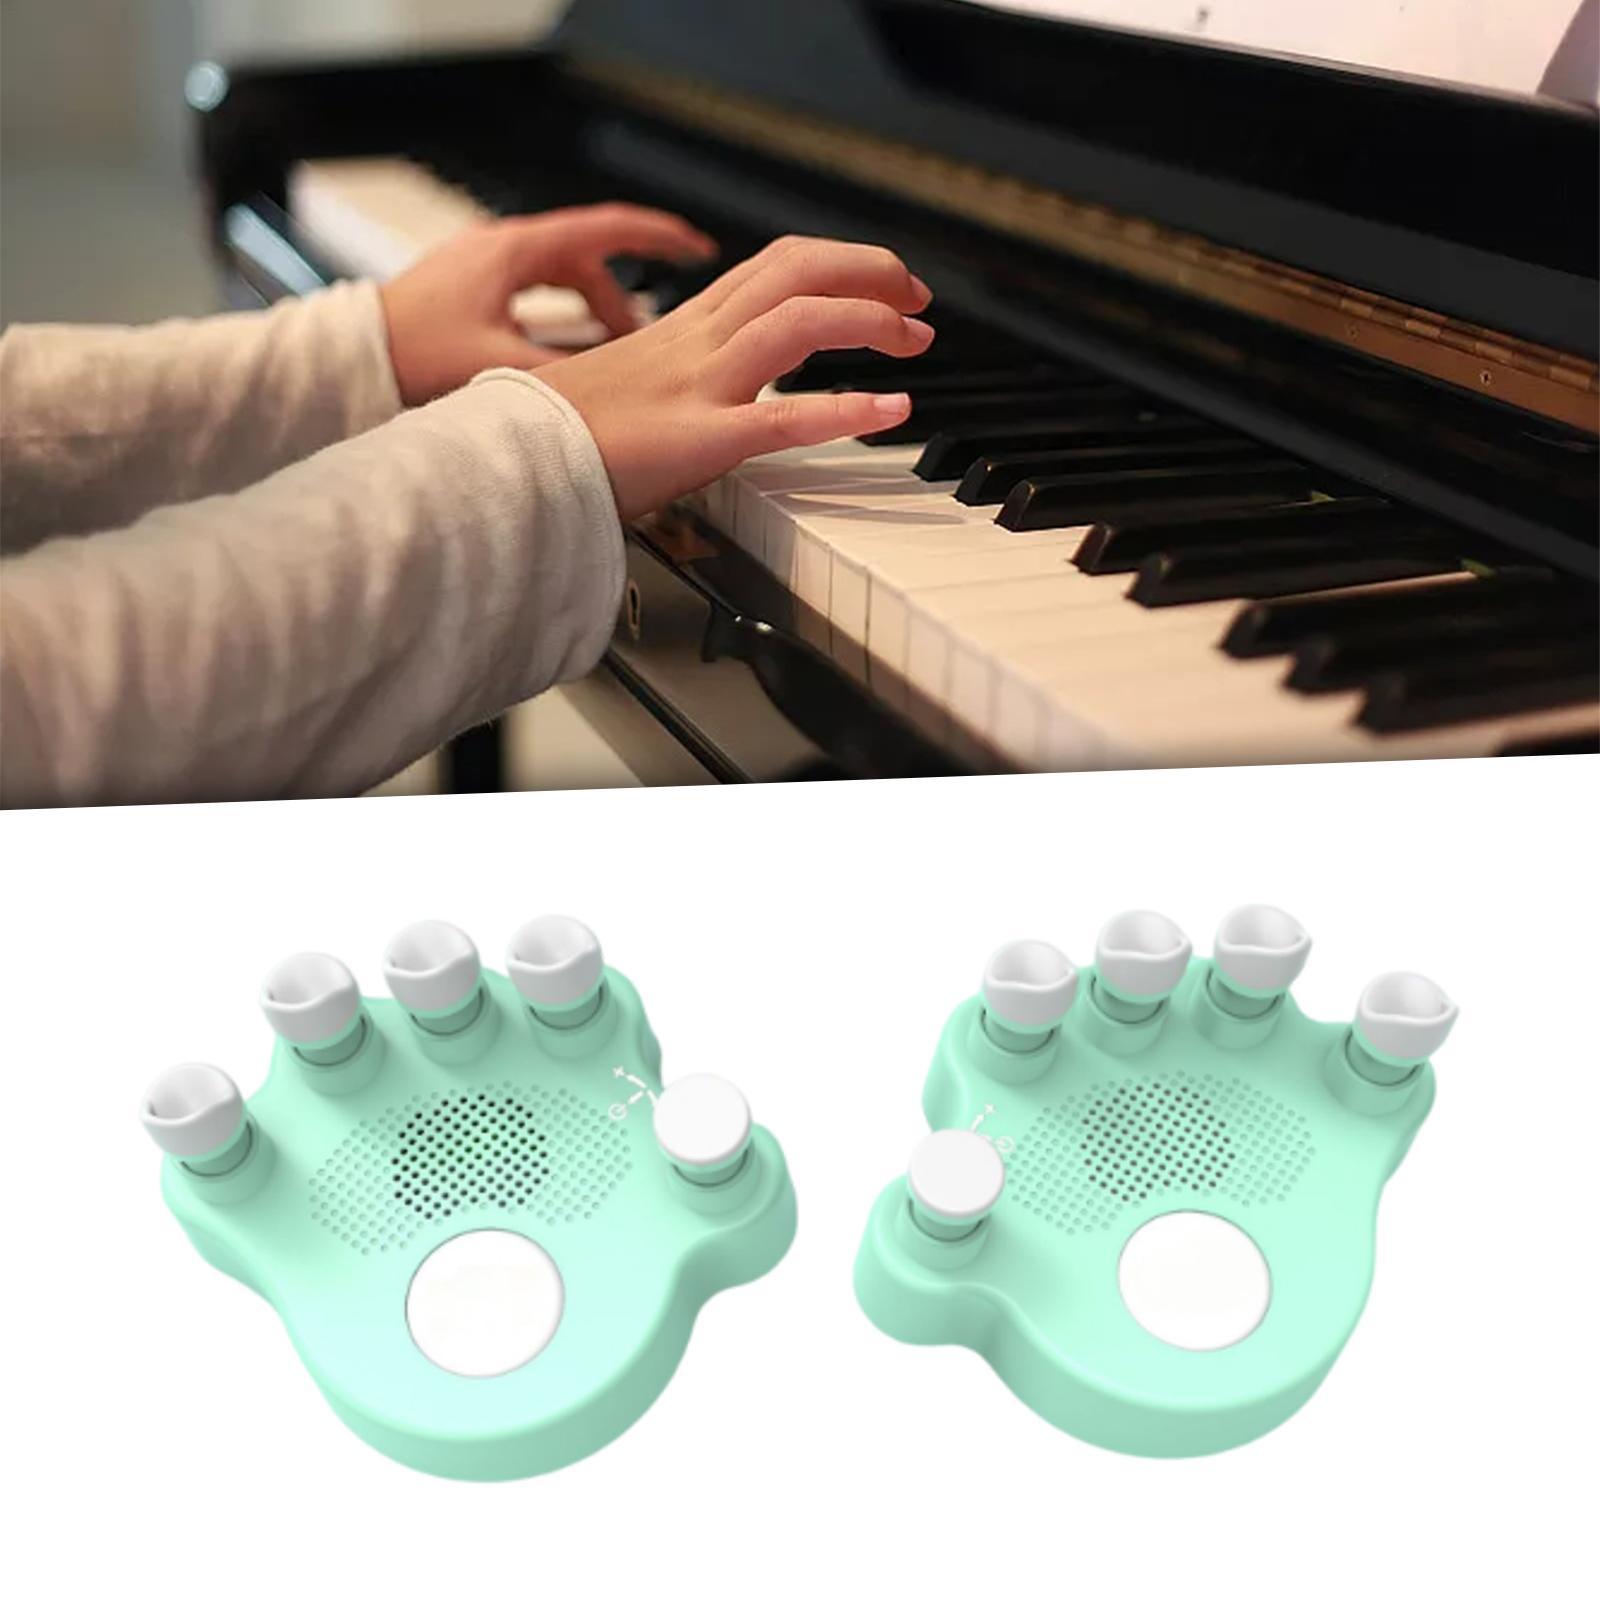 Piano Finger Trainers Built in Piano Music Speaker Hand Exerciser for Kids Green